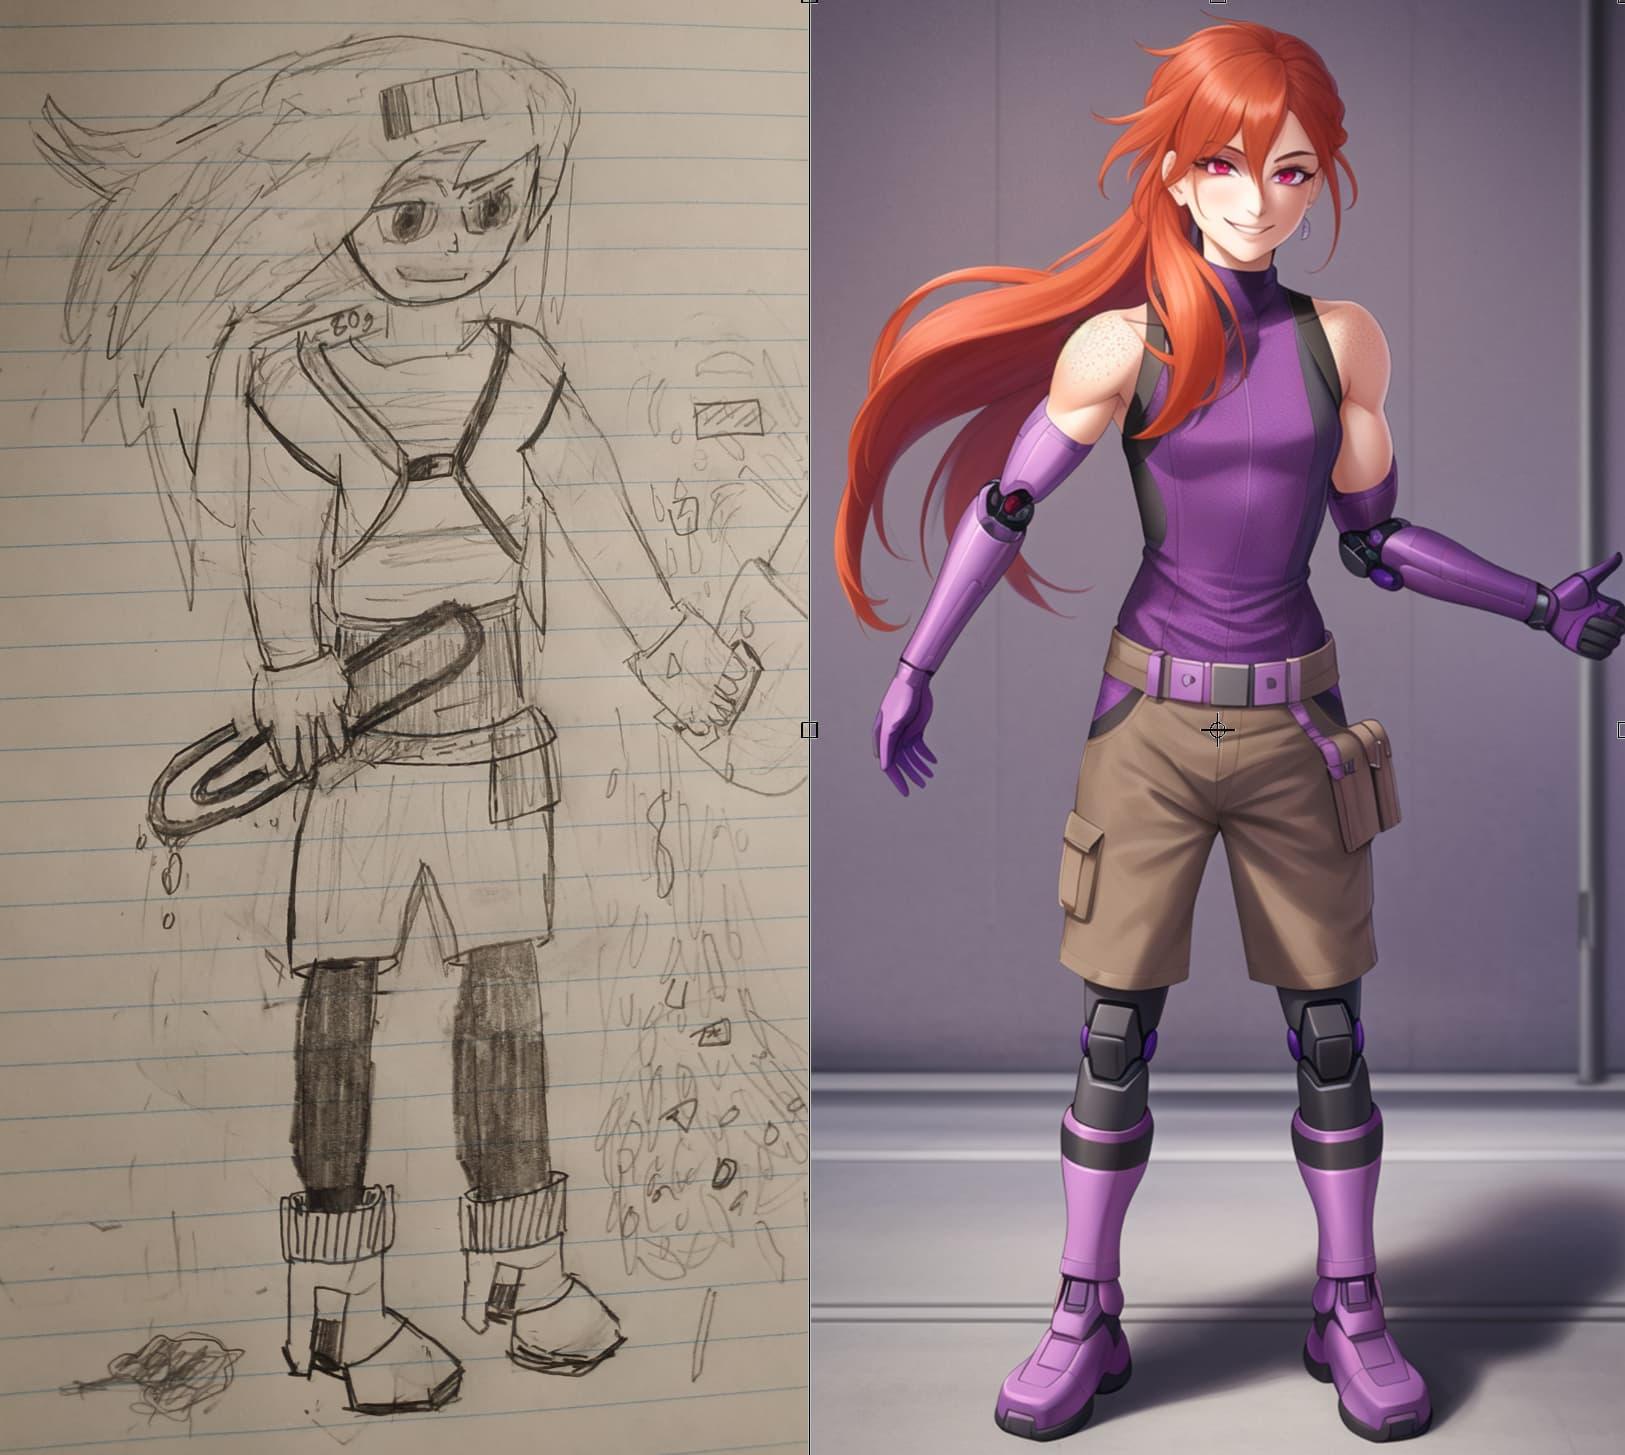 An anime-style illustration of a girl with long orange hair, wearing a purple and black sleeveless top and purple robotic gloves, with khaki shorts, a fanny pack, black robotic legs, and large purple robotic boots - beside the original crude pencil sketch